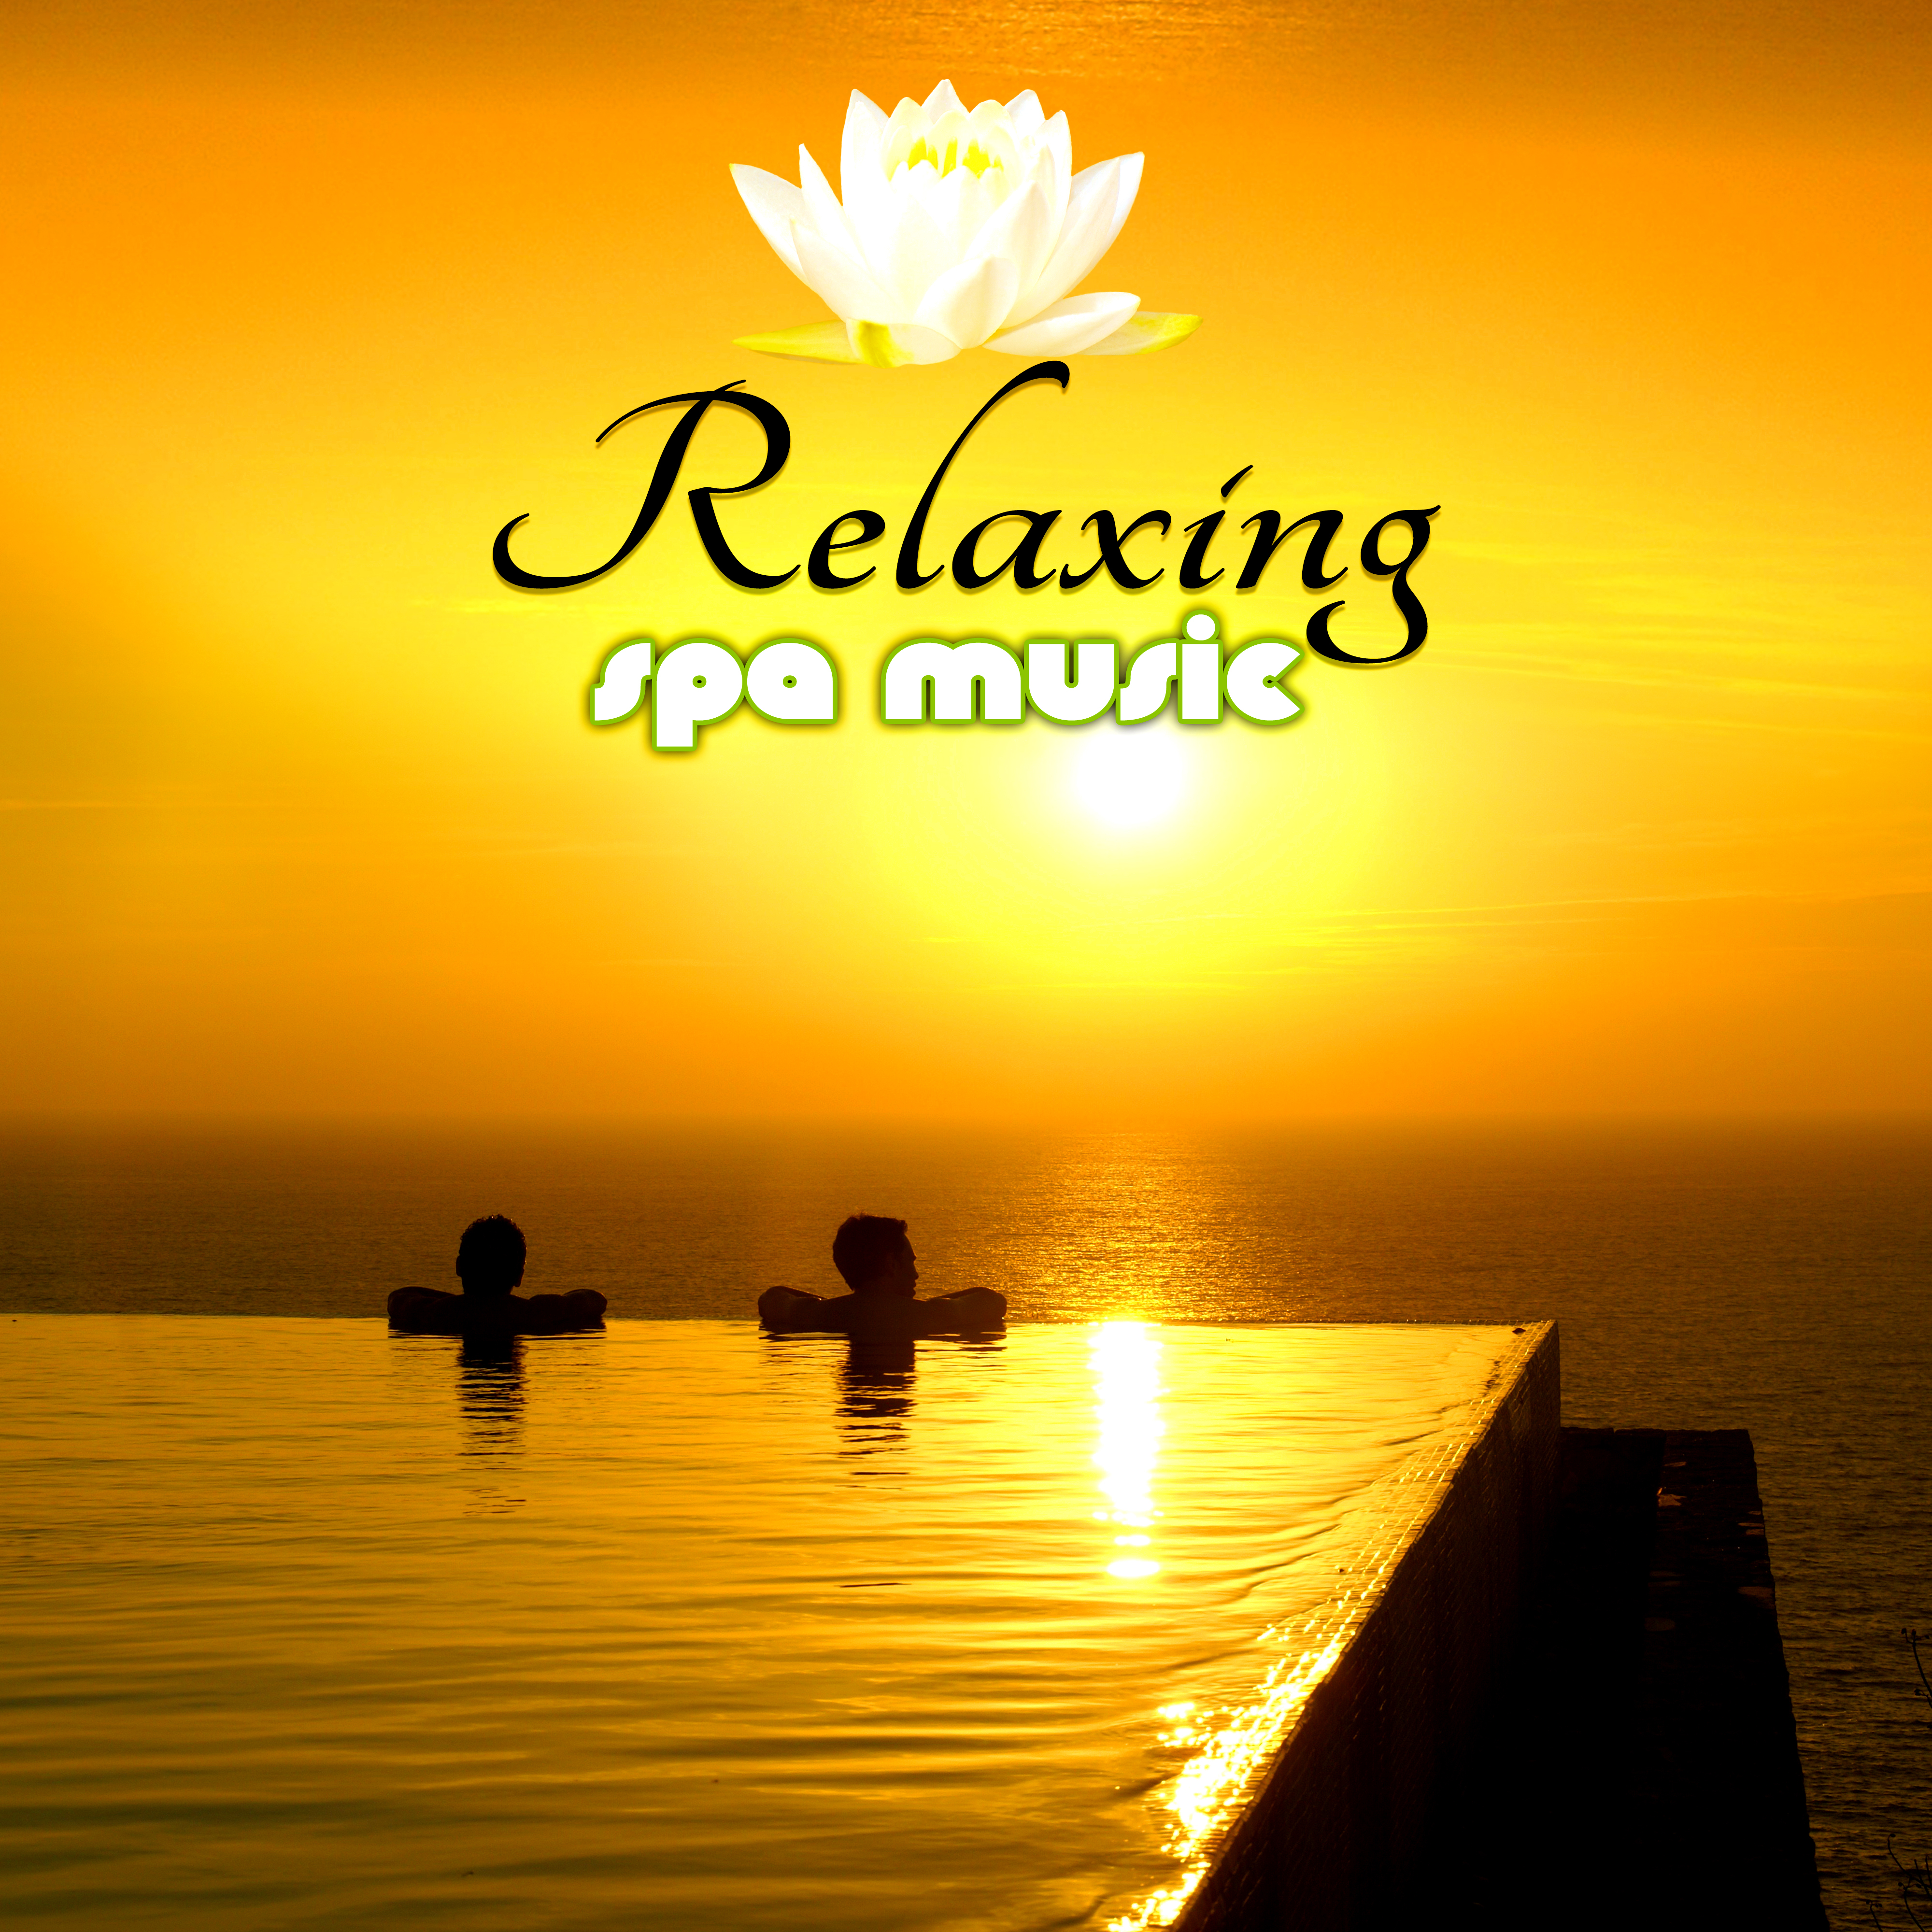 Relaxing Spa Music  Nature Sounds for Relaxation, Meditation, Spa  Wellness, Reiki Healing, Yoga, Ayurveda, Calm Background Music for Oil Massage